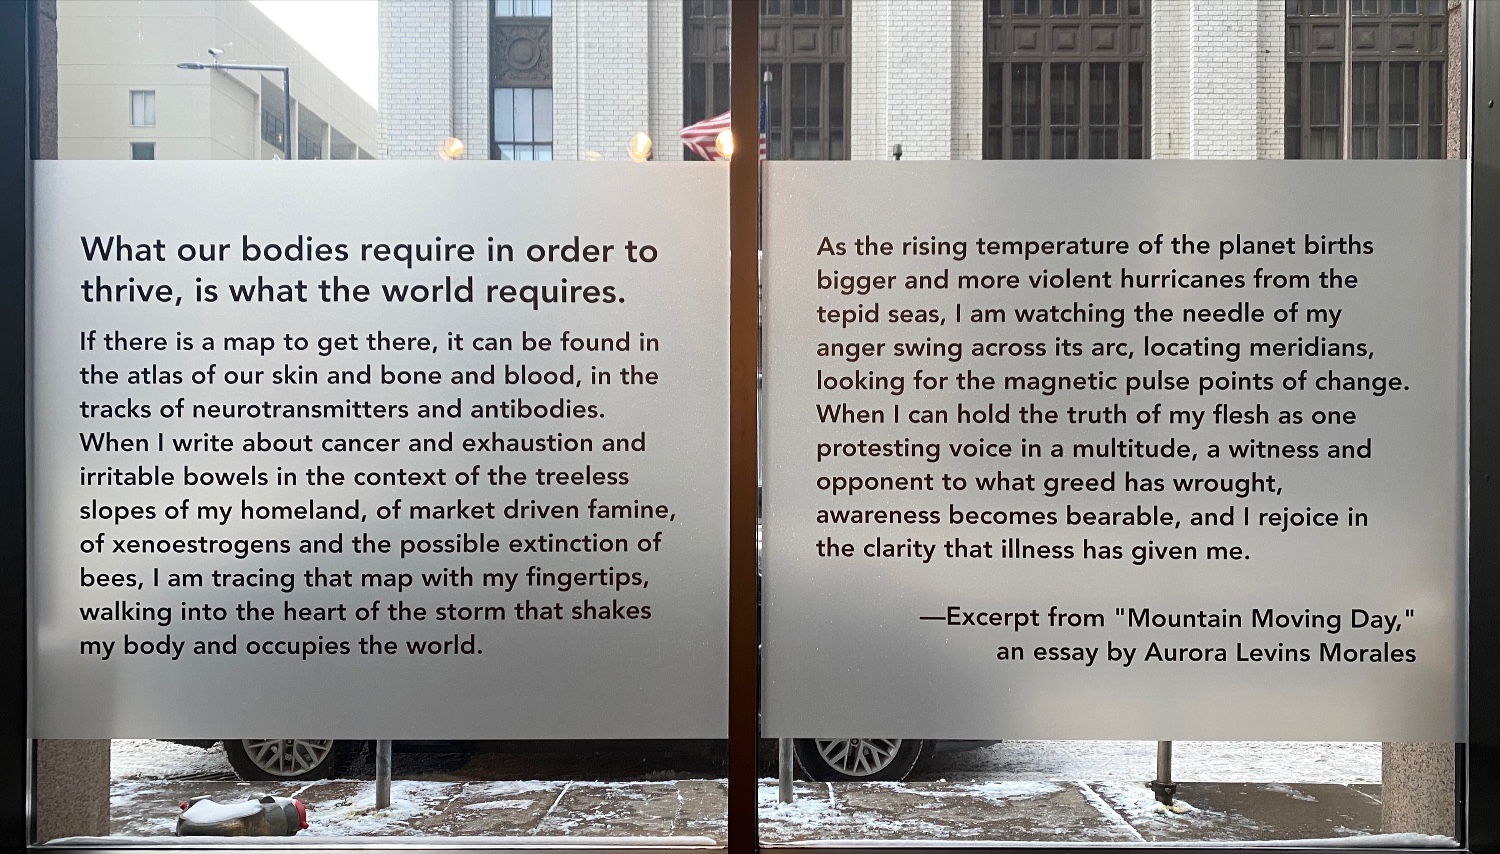 Two large window clings with an excerpt from an essay about illness and climate change